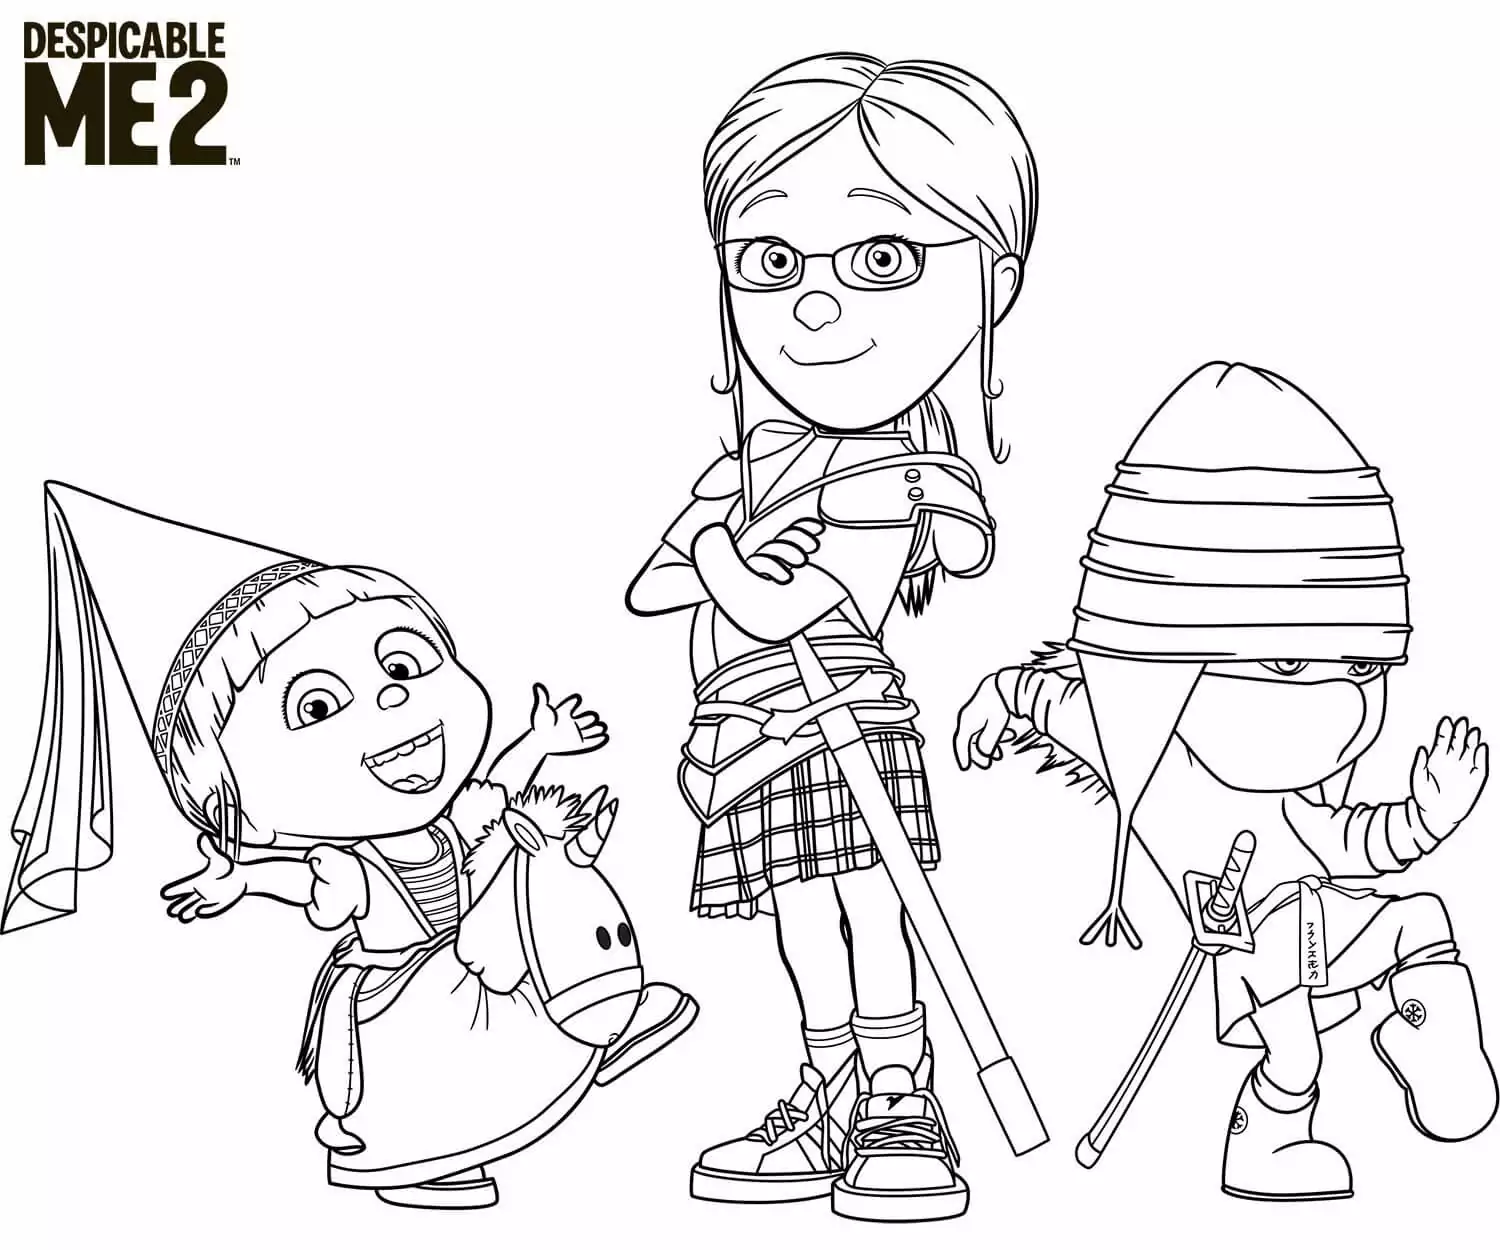 Kids from Despicable Me 2